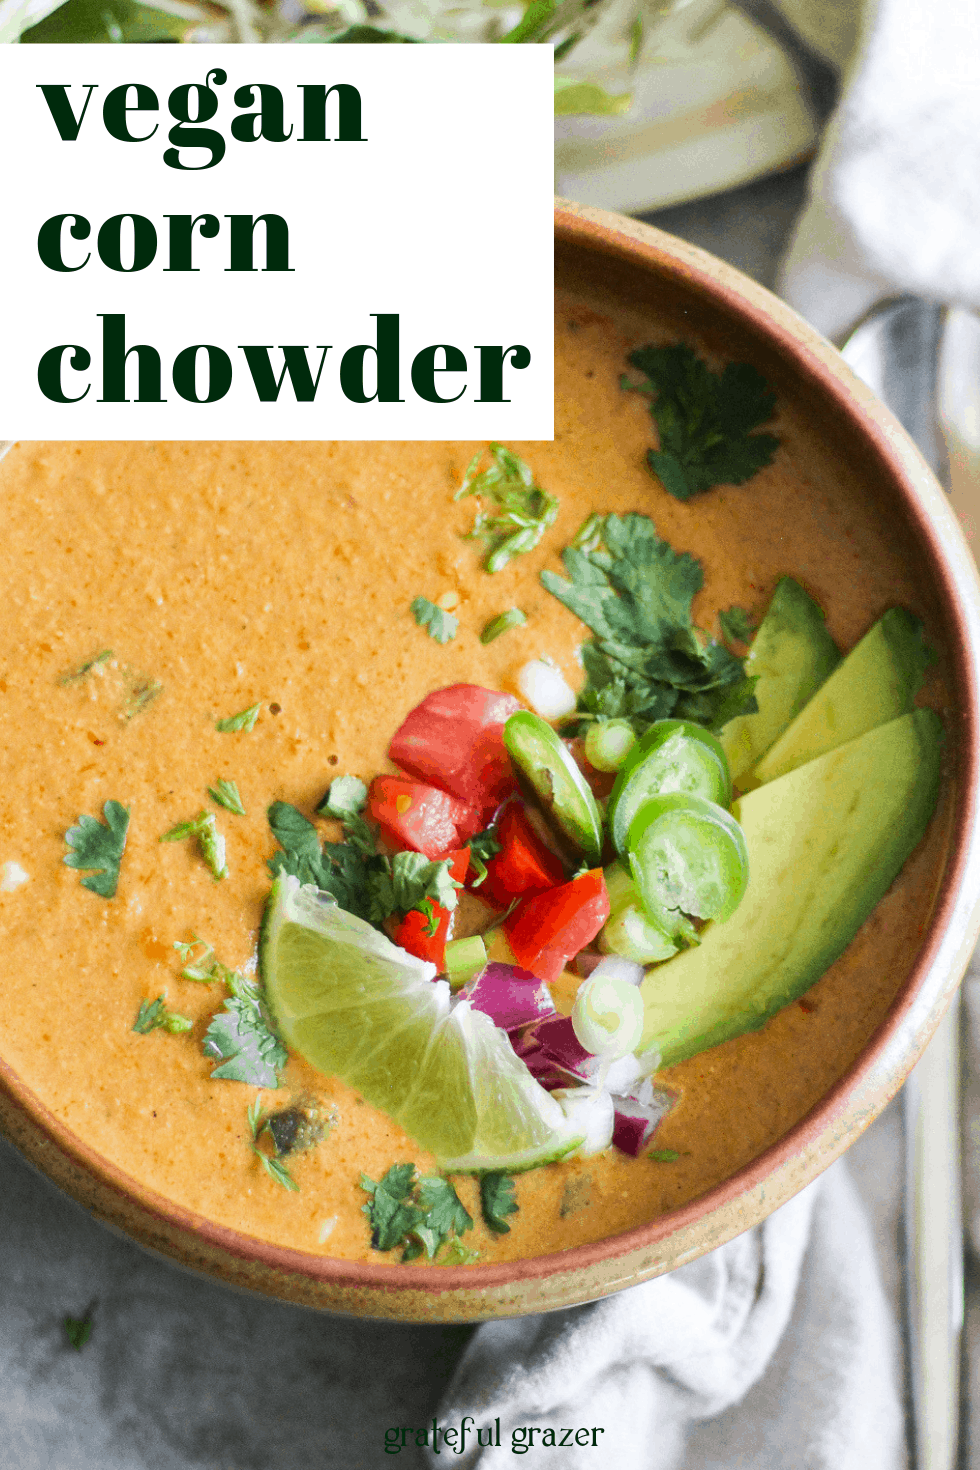 Vegan corn chowder soup with lime and avocado in a brown bowl with text that reads "vegan corn chowder."